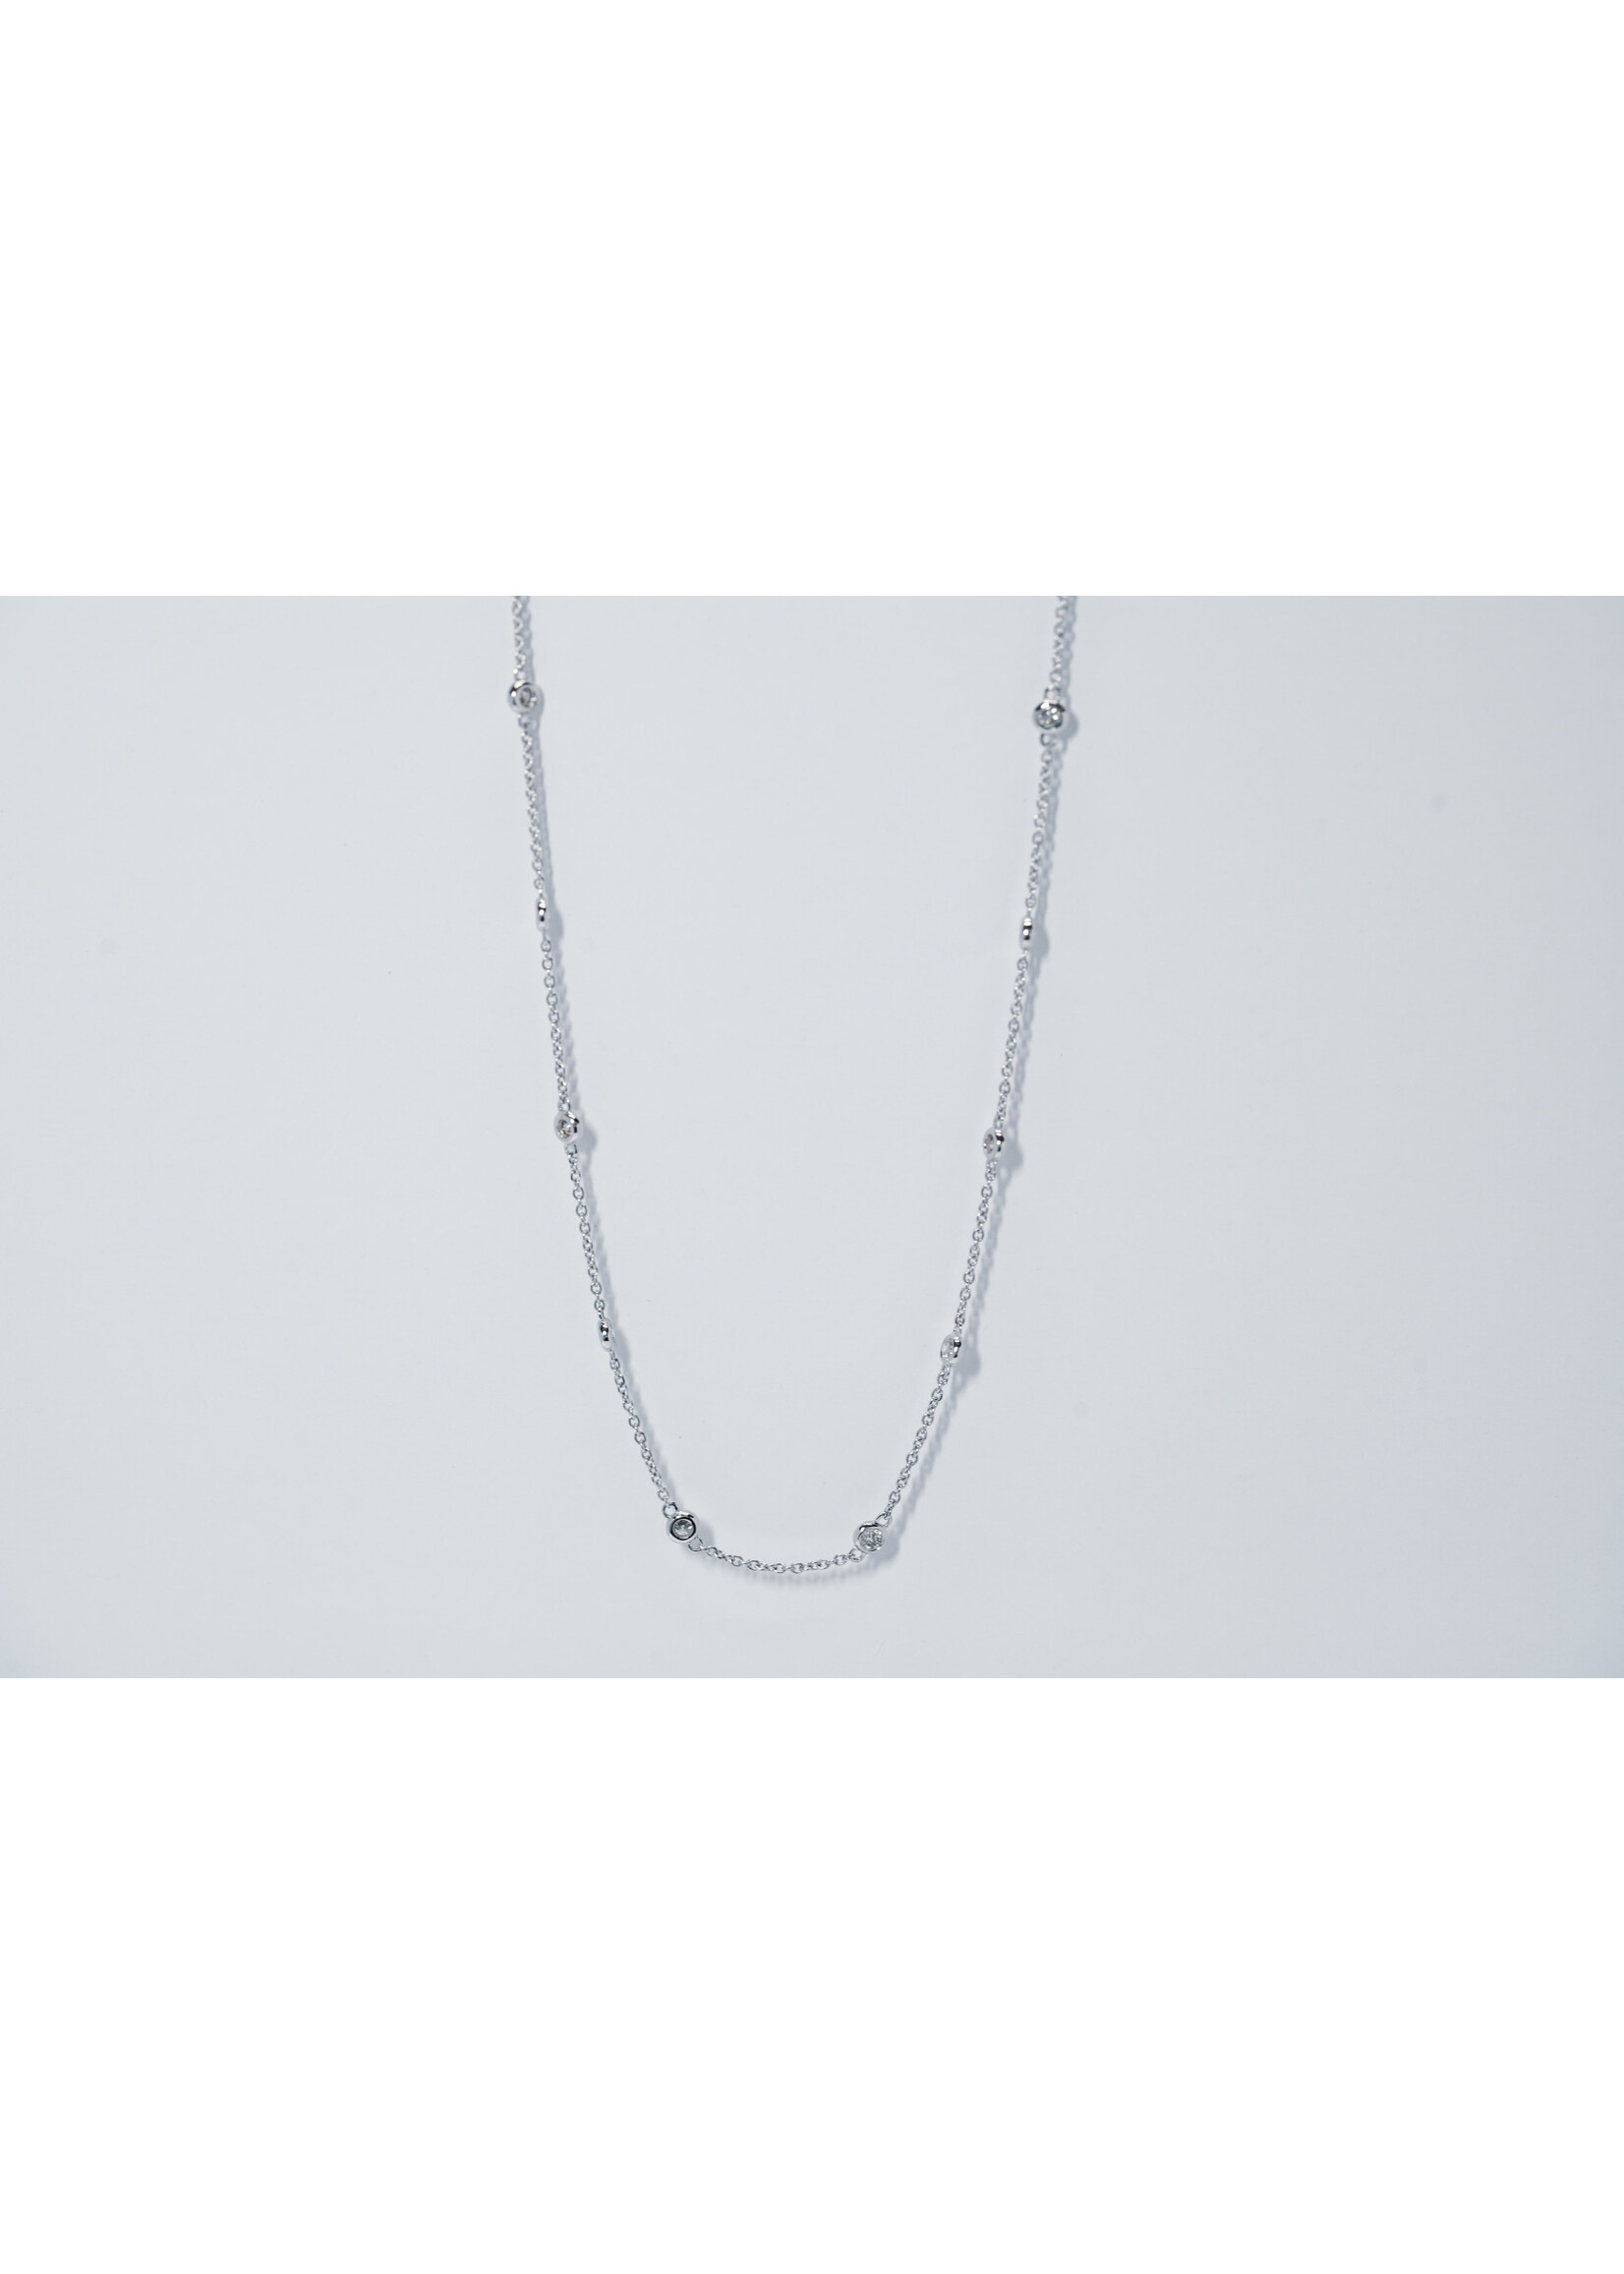 14KW 3.52g .61ctw Diamond By The Inch Necklace 16-18-20"